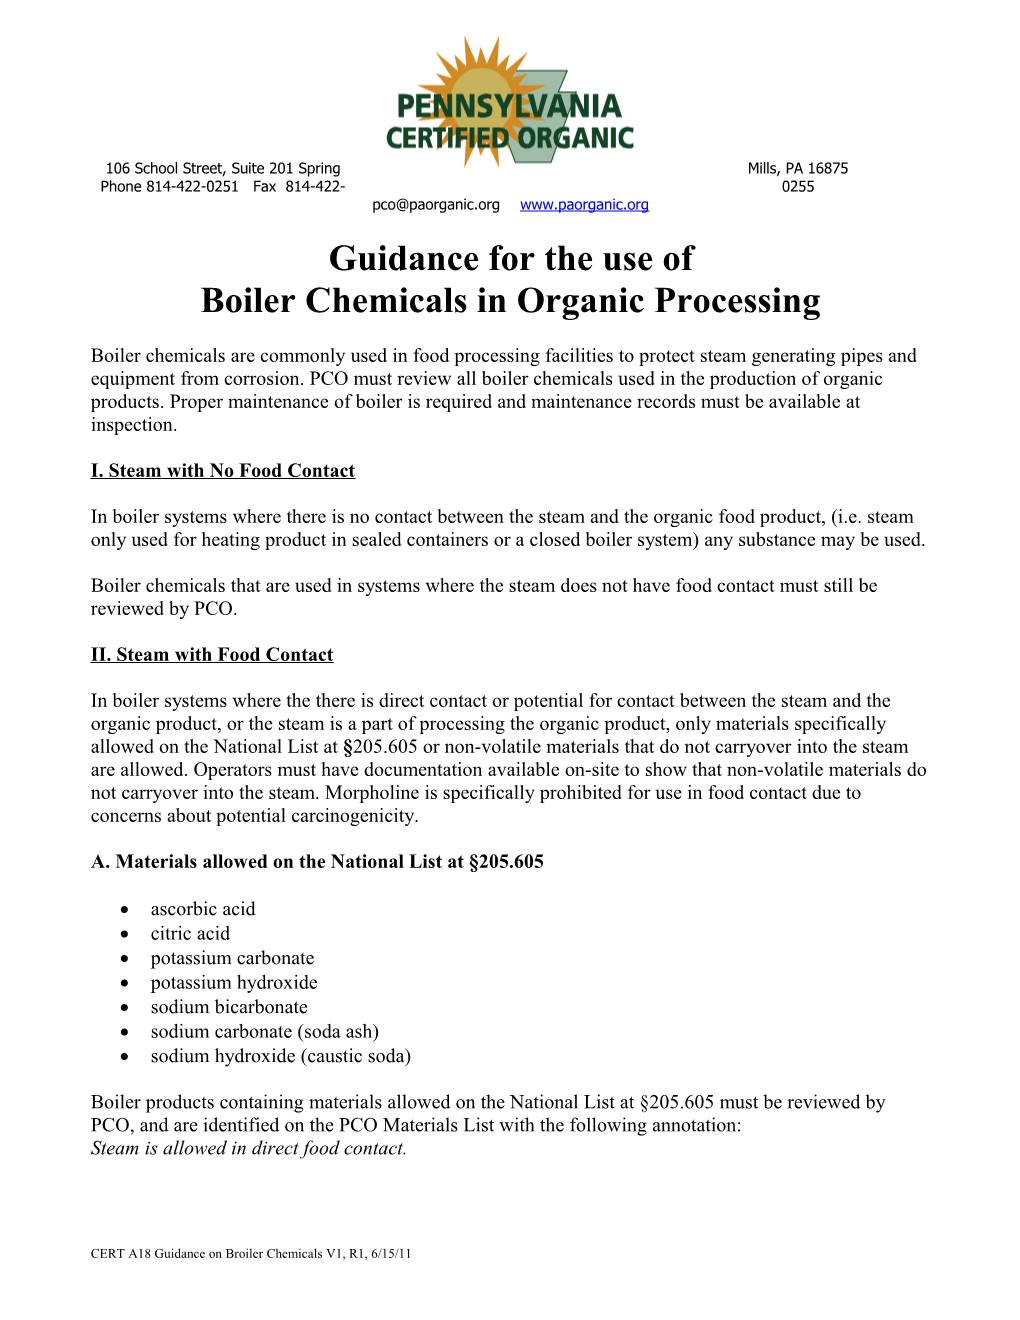 Boiler Chemicals Used in Organic Food Processing Systems